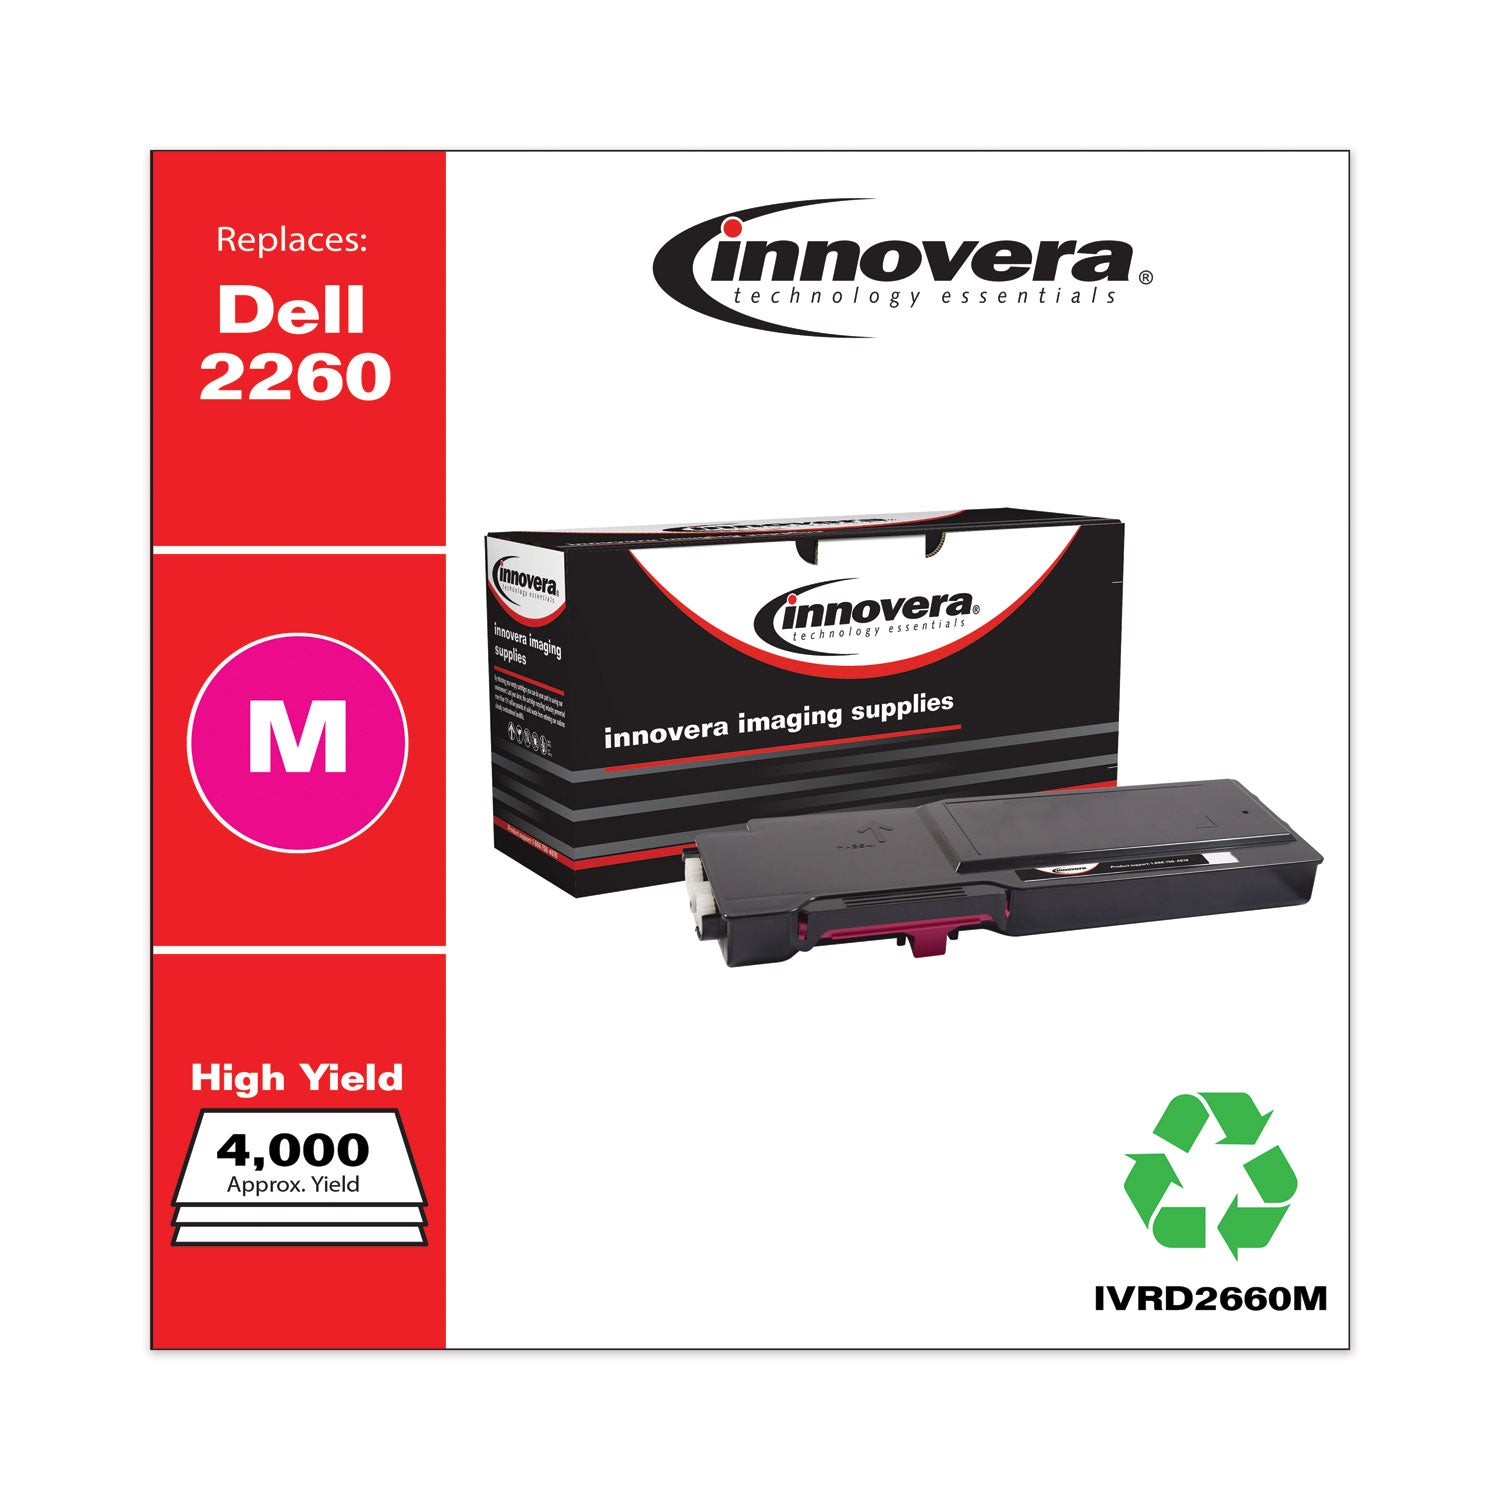 remanufactured-magenta-high-yield-toner-replacement-for-593-bbbs-4000-page-yield-ships-in-1-3-business-days_ivrd2660m - 2